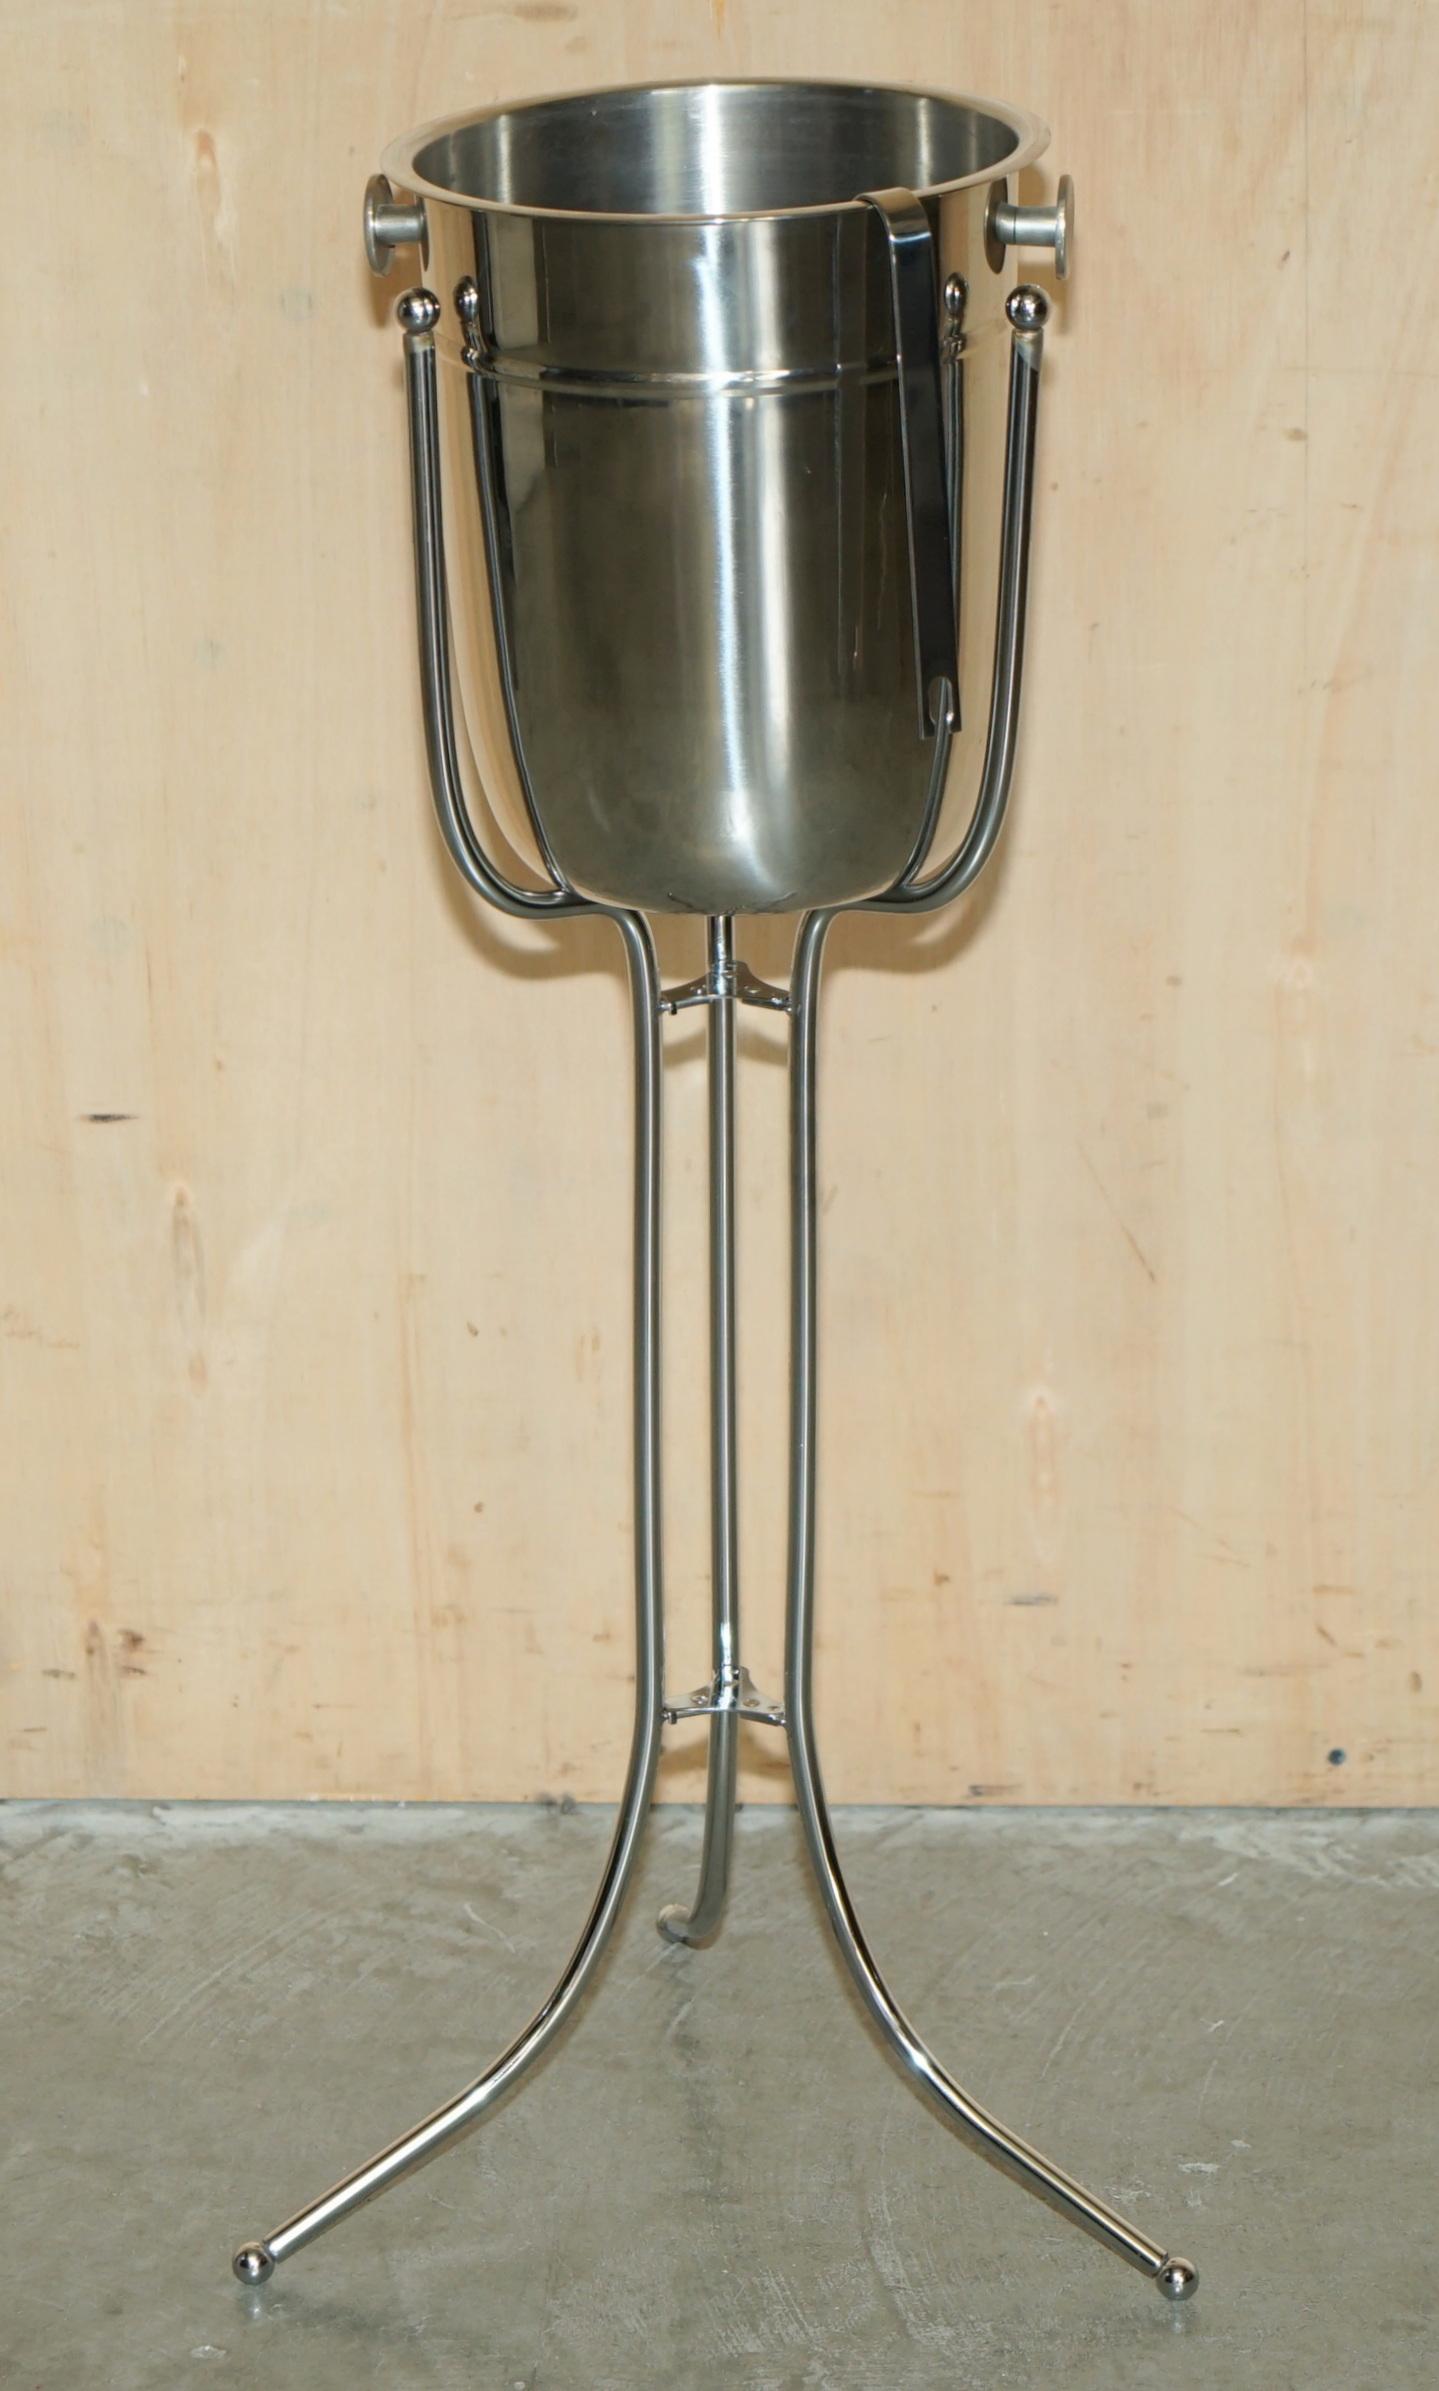 Royal House Antiques is delighted to offer for sale this lovely pair of decorative, Stainless Steel Champagne buckets on stands

A good looking well made and decorative pair that make serving drinks a sense of occasion

They may have some light age